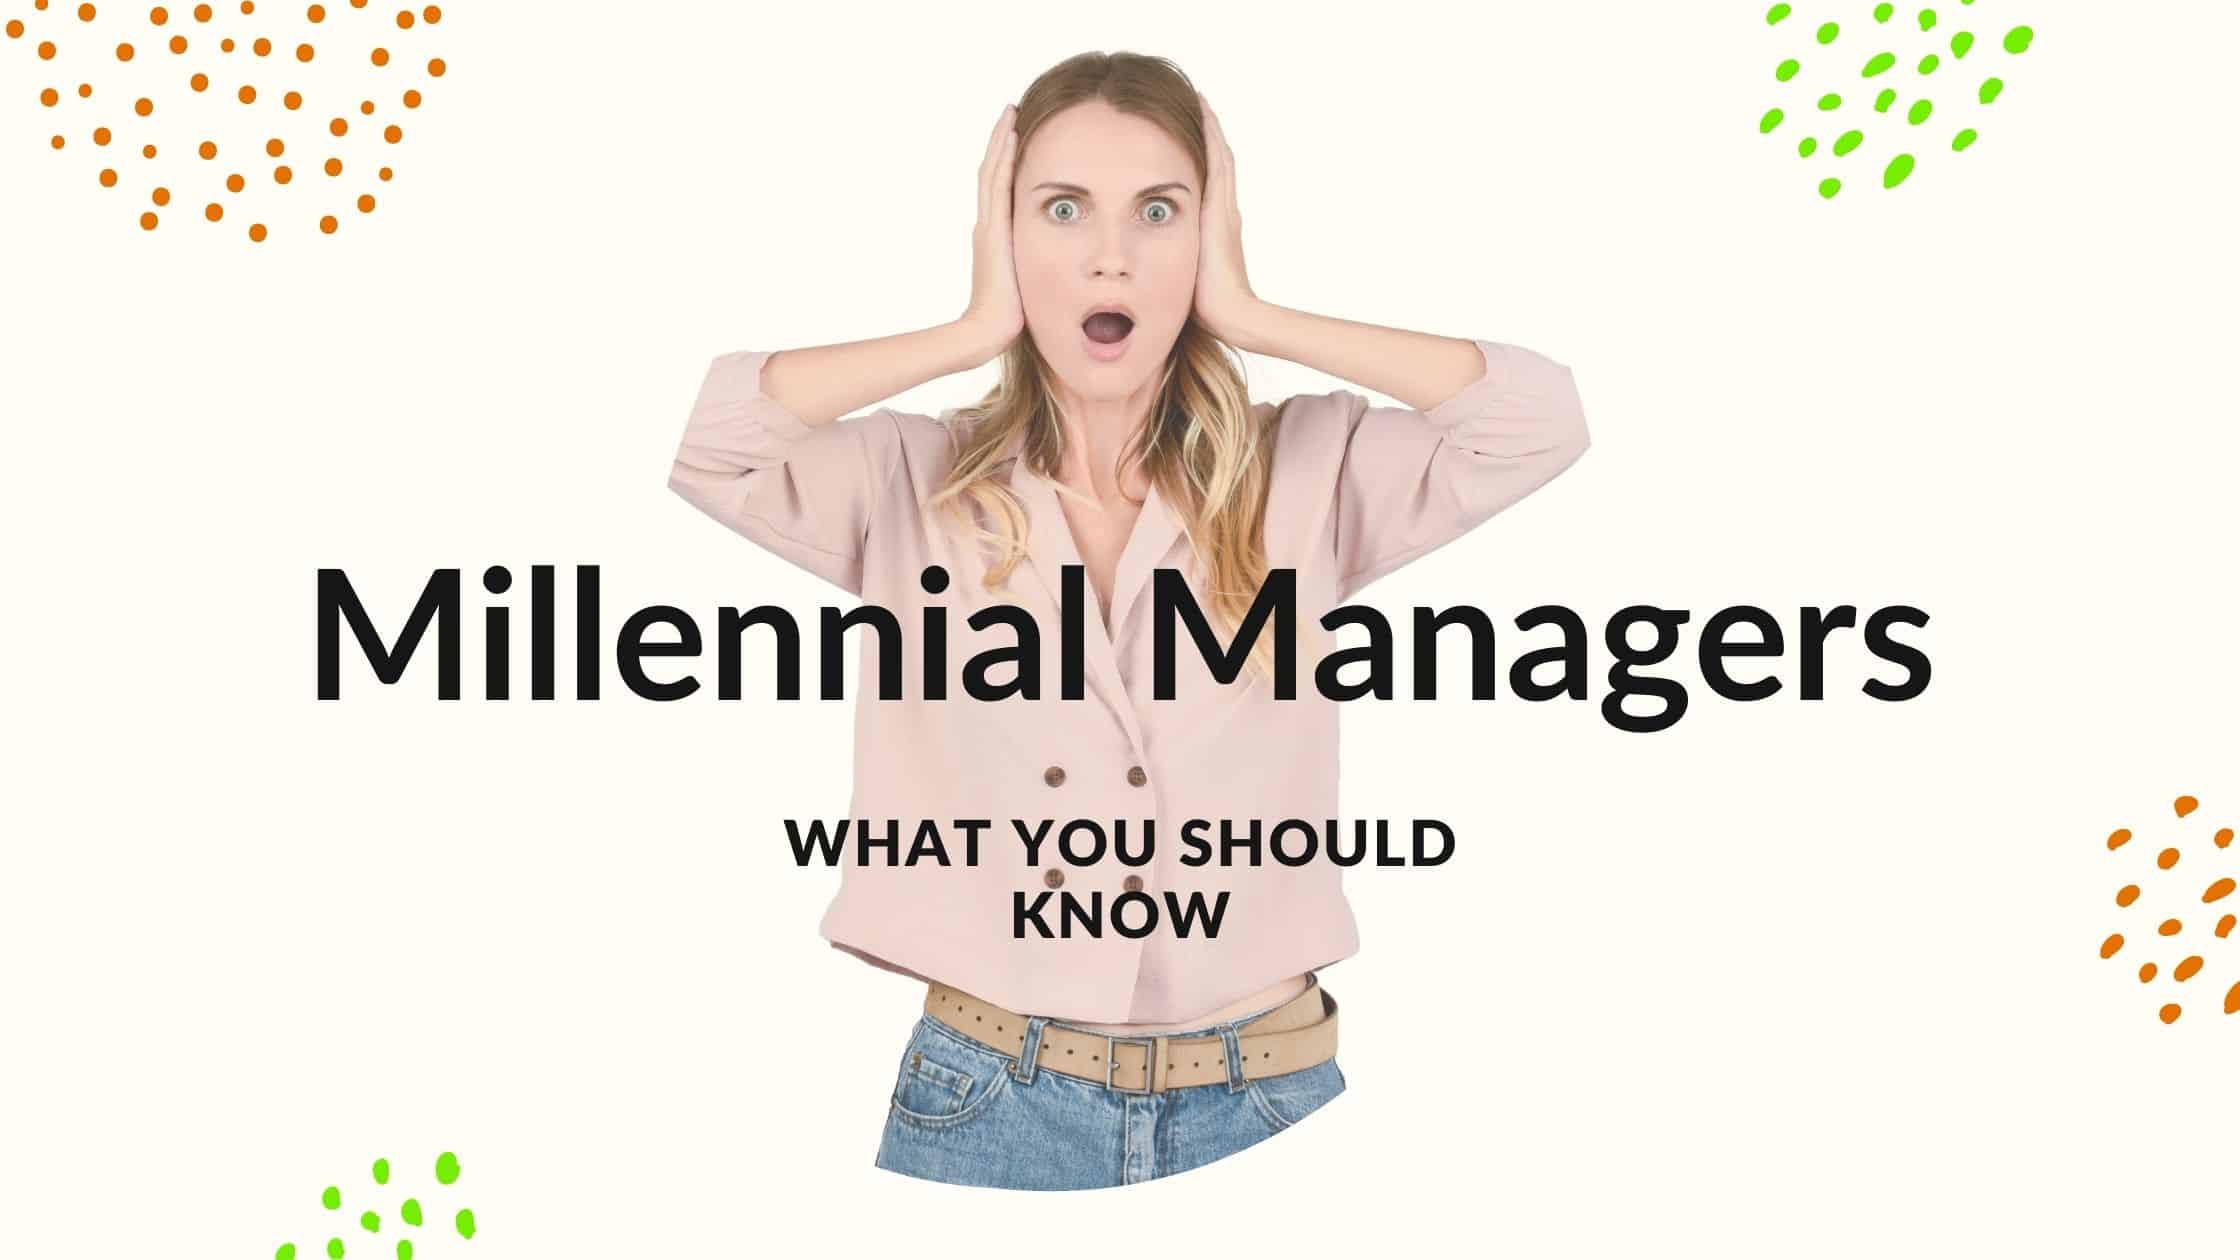 Working for a Millennial Manager - What You Should Know